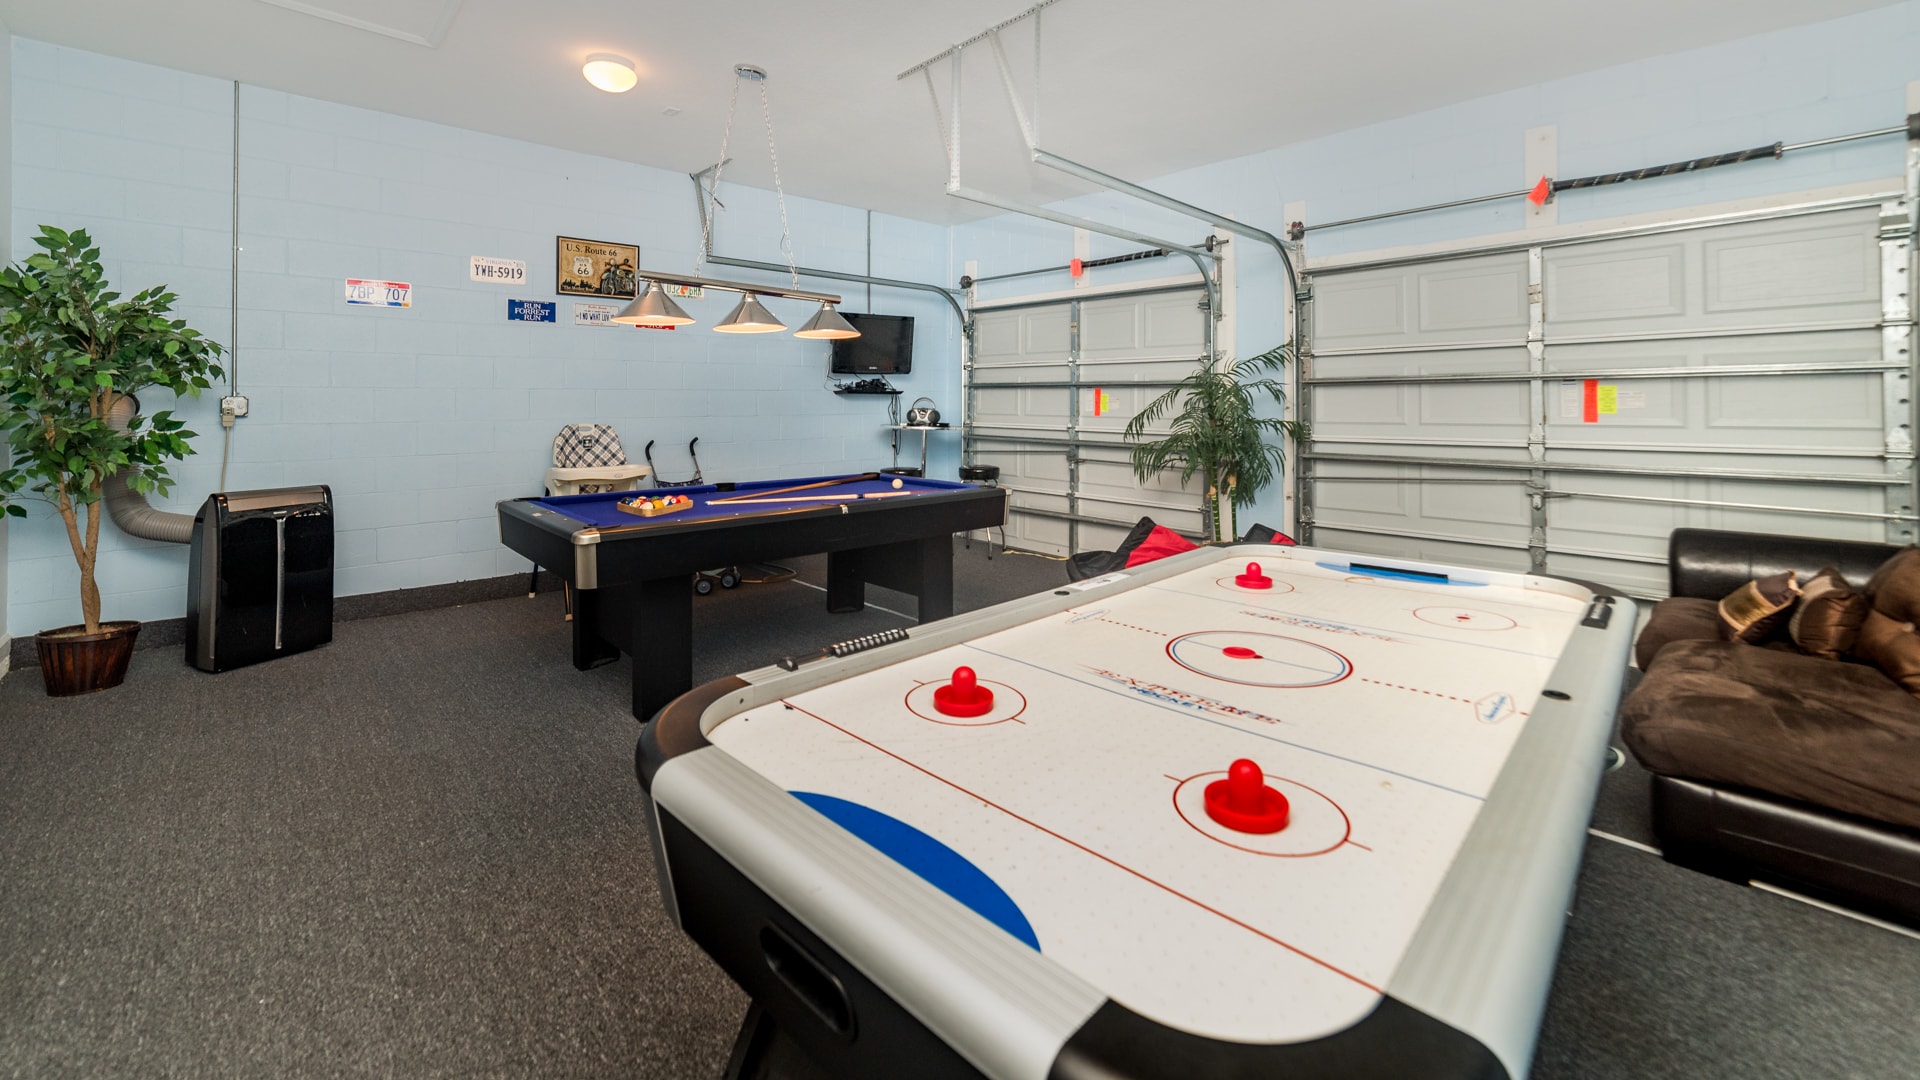 Game Room - AIR HOCKEY WAS REPLACED WITH PING PONG TABLE
32